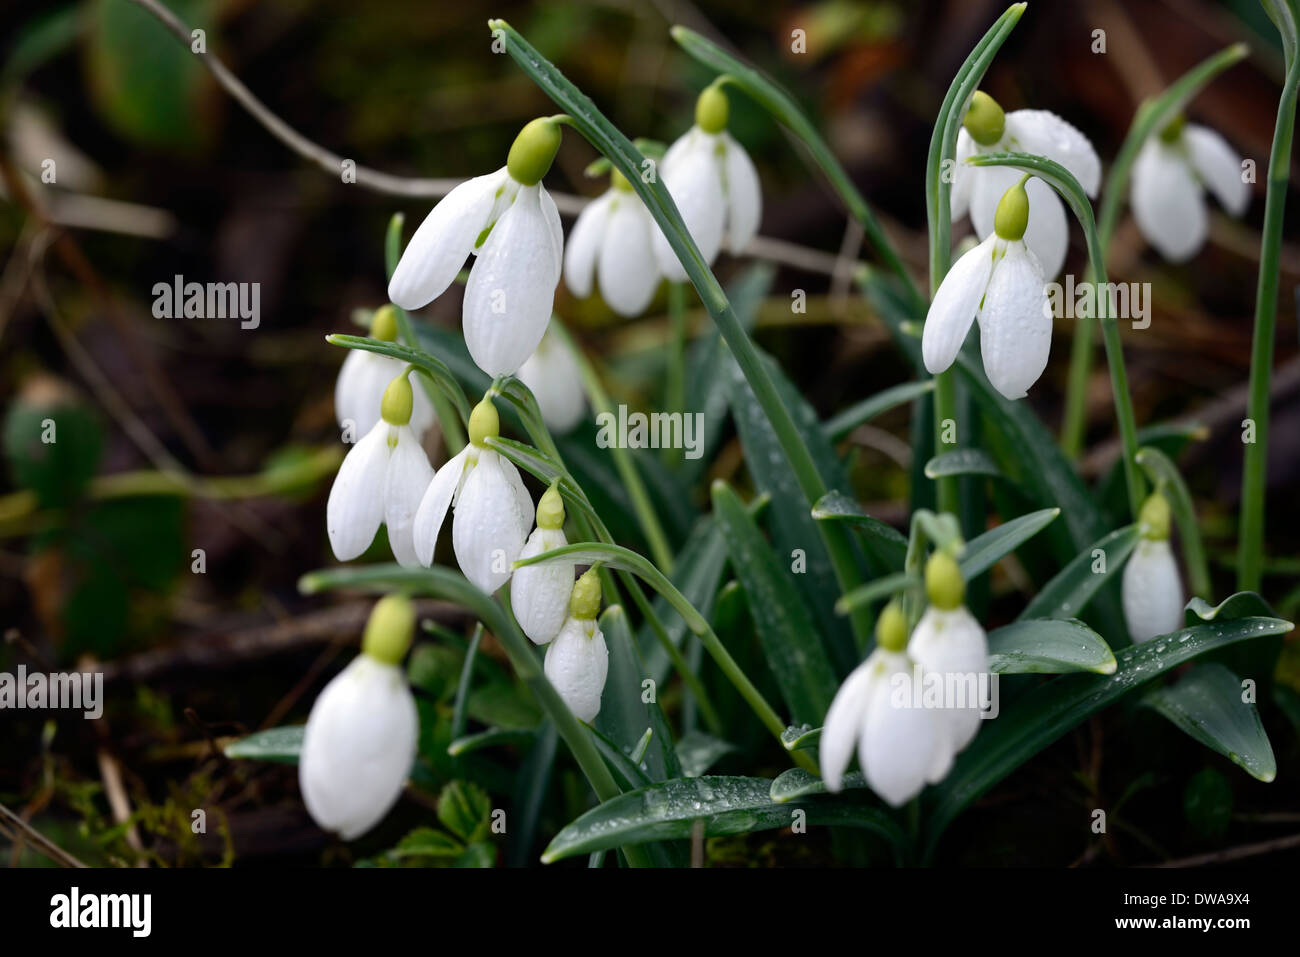 Galanthus dopey snowdrop white flowers lime green markings flowers bulbs snowdrops Stock Photo